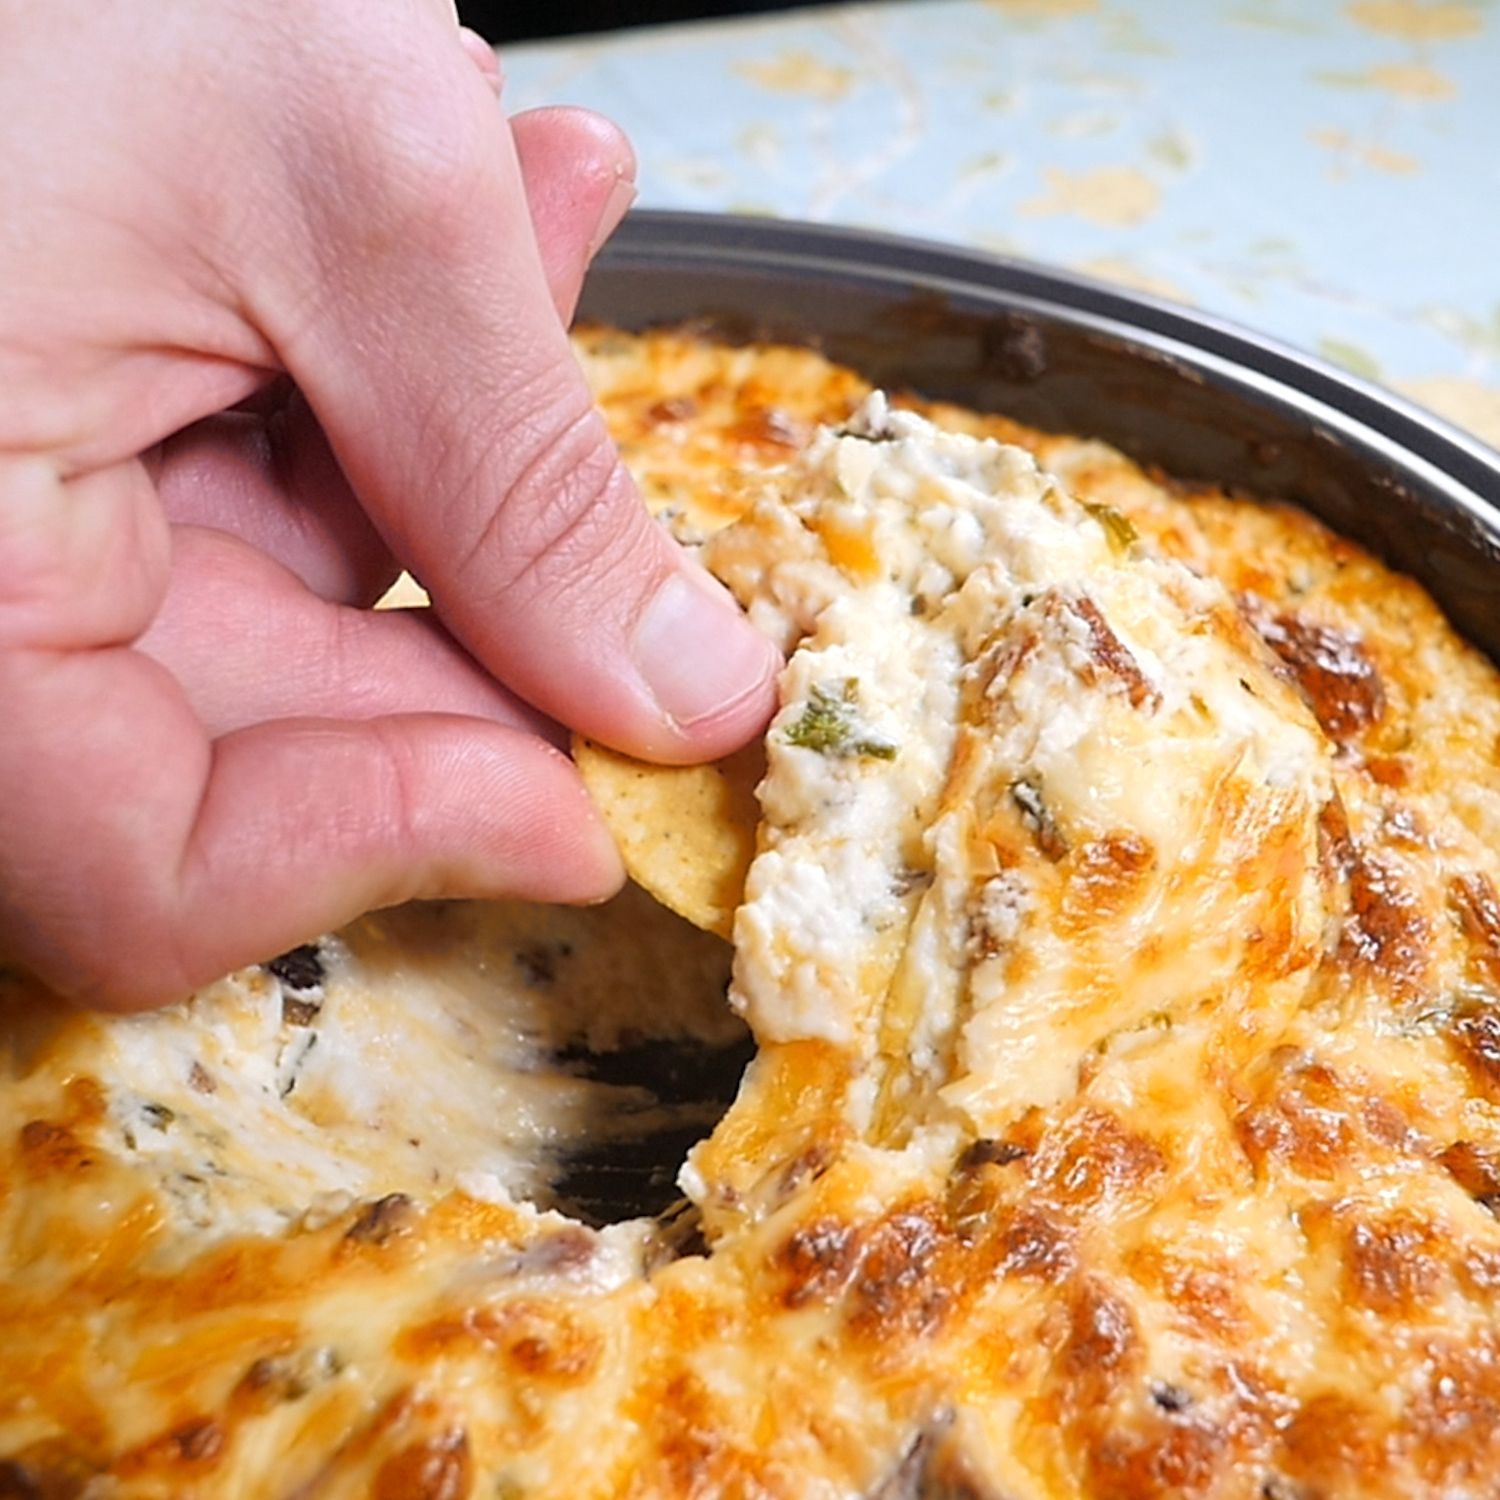 Bacon Cheesy Dip.8 oz cream cheese, softened; 2 C sour cream; 1.5 C cheddar cheese, grated; 1 C bacon (6-8